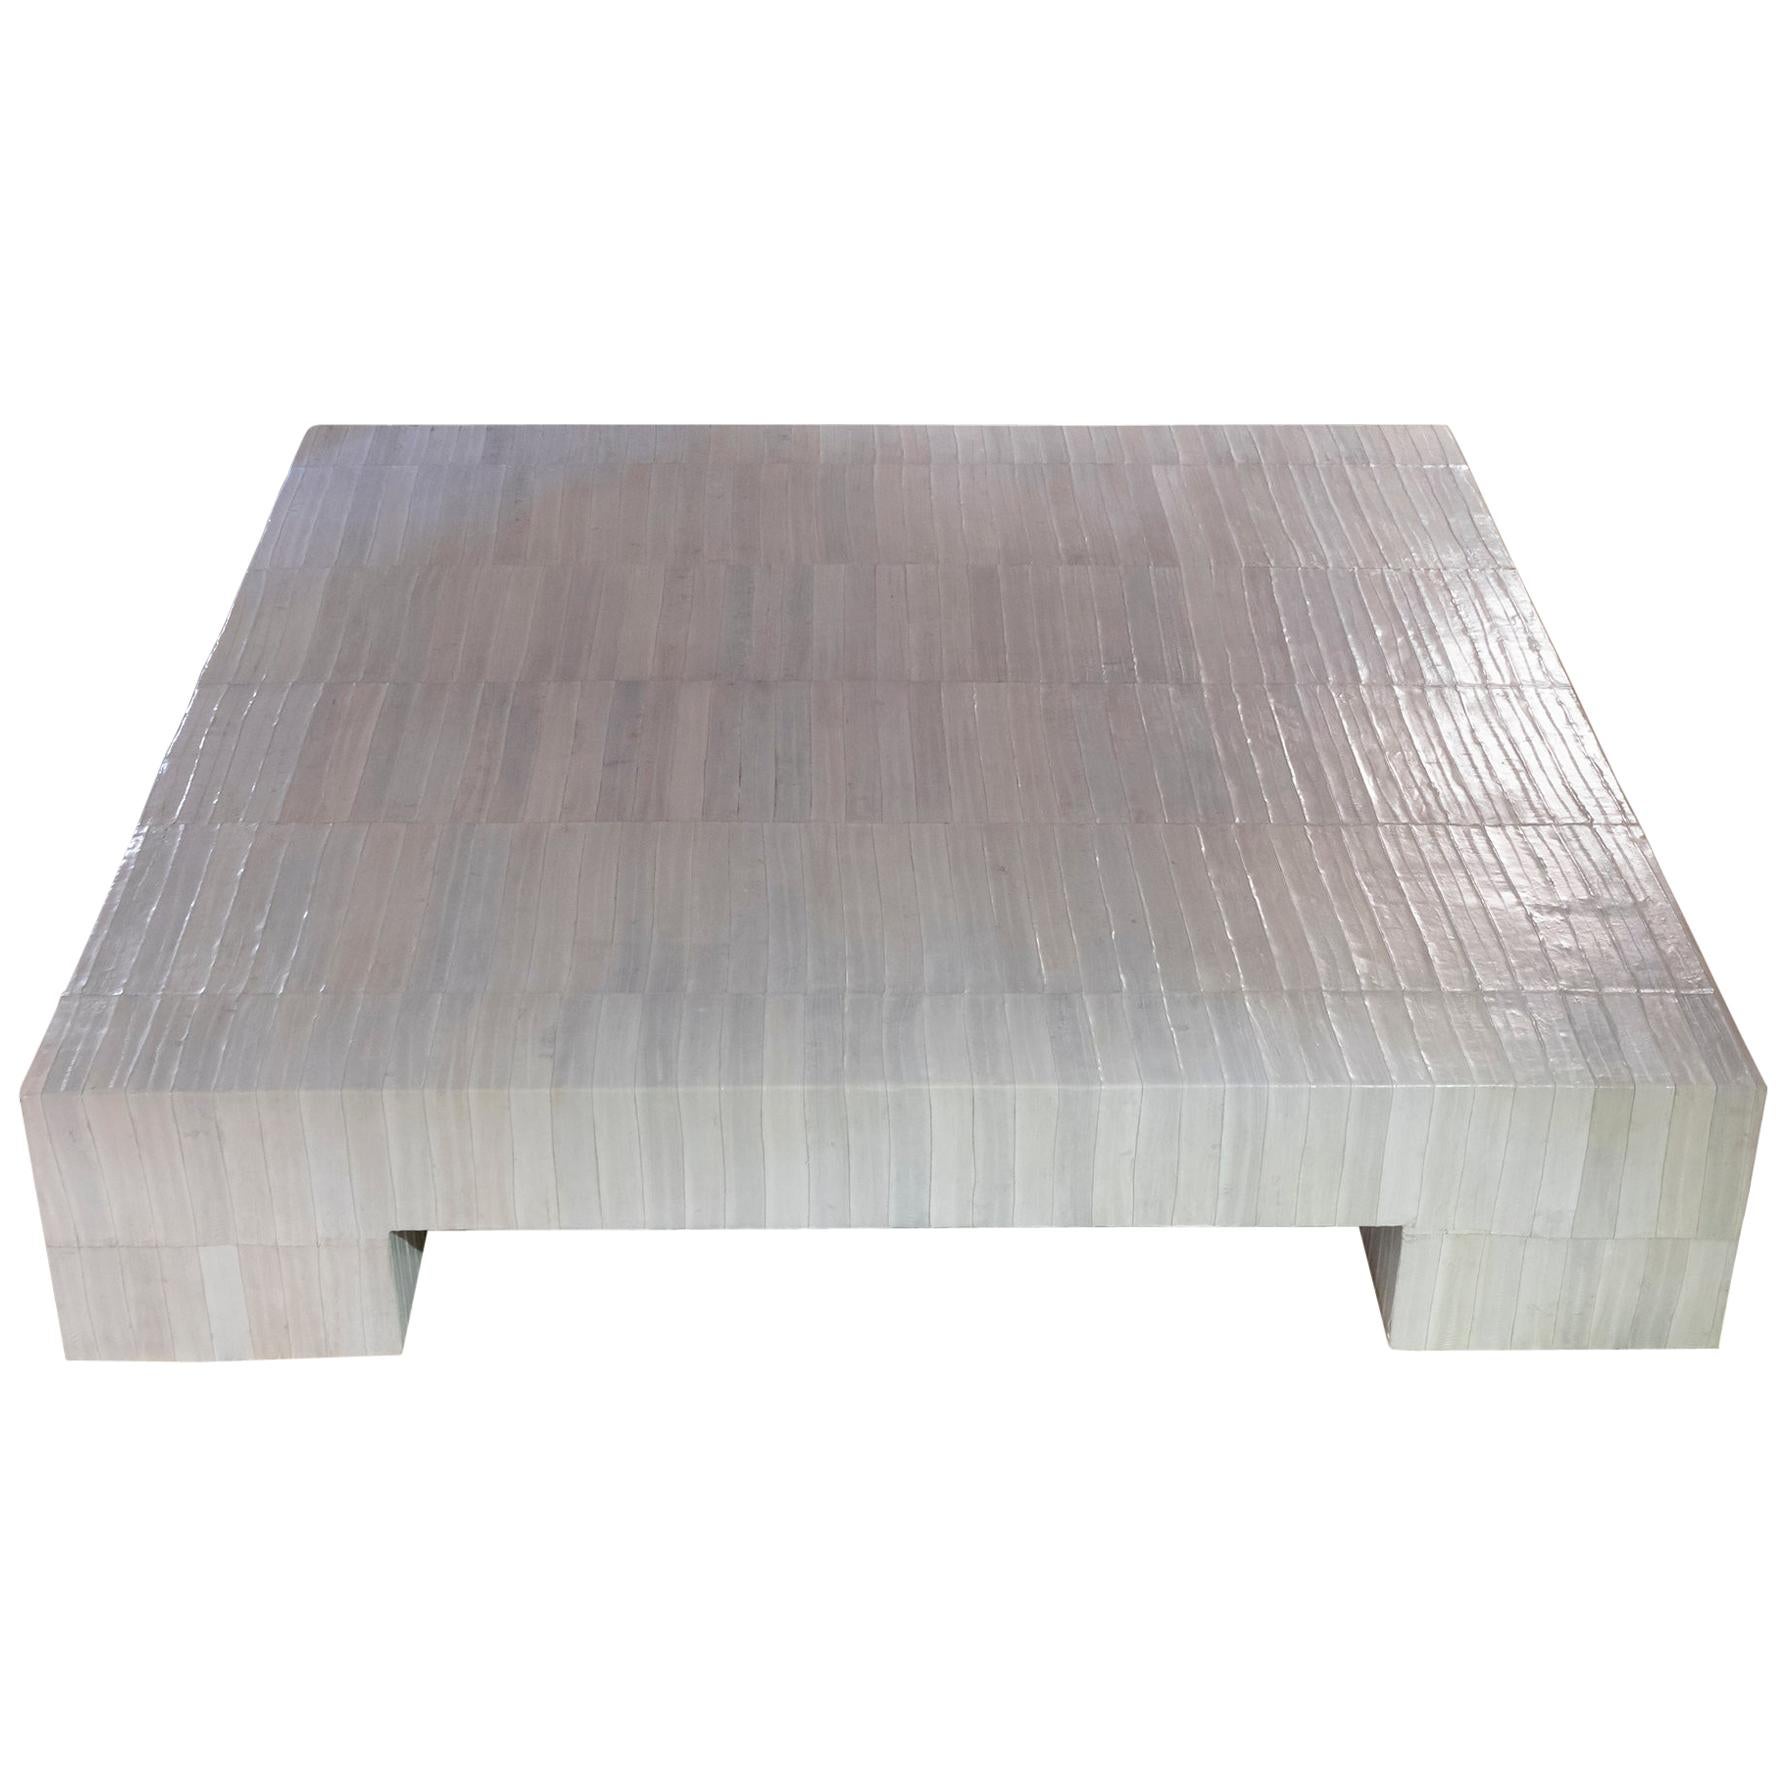 Flair Edition Ivory Eel Skin Coffee Table, Italy, 2020